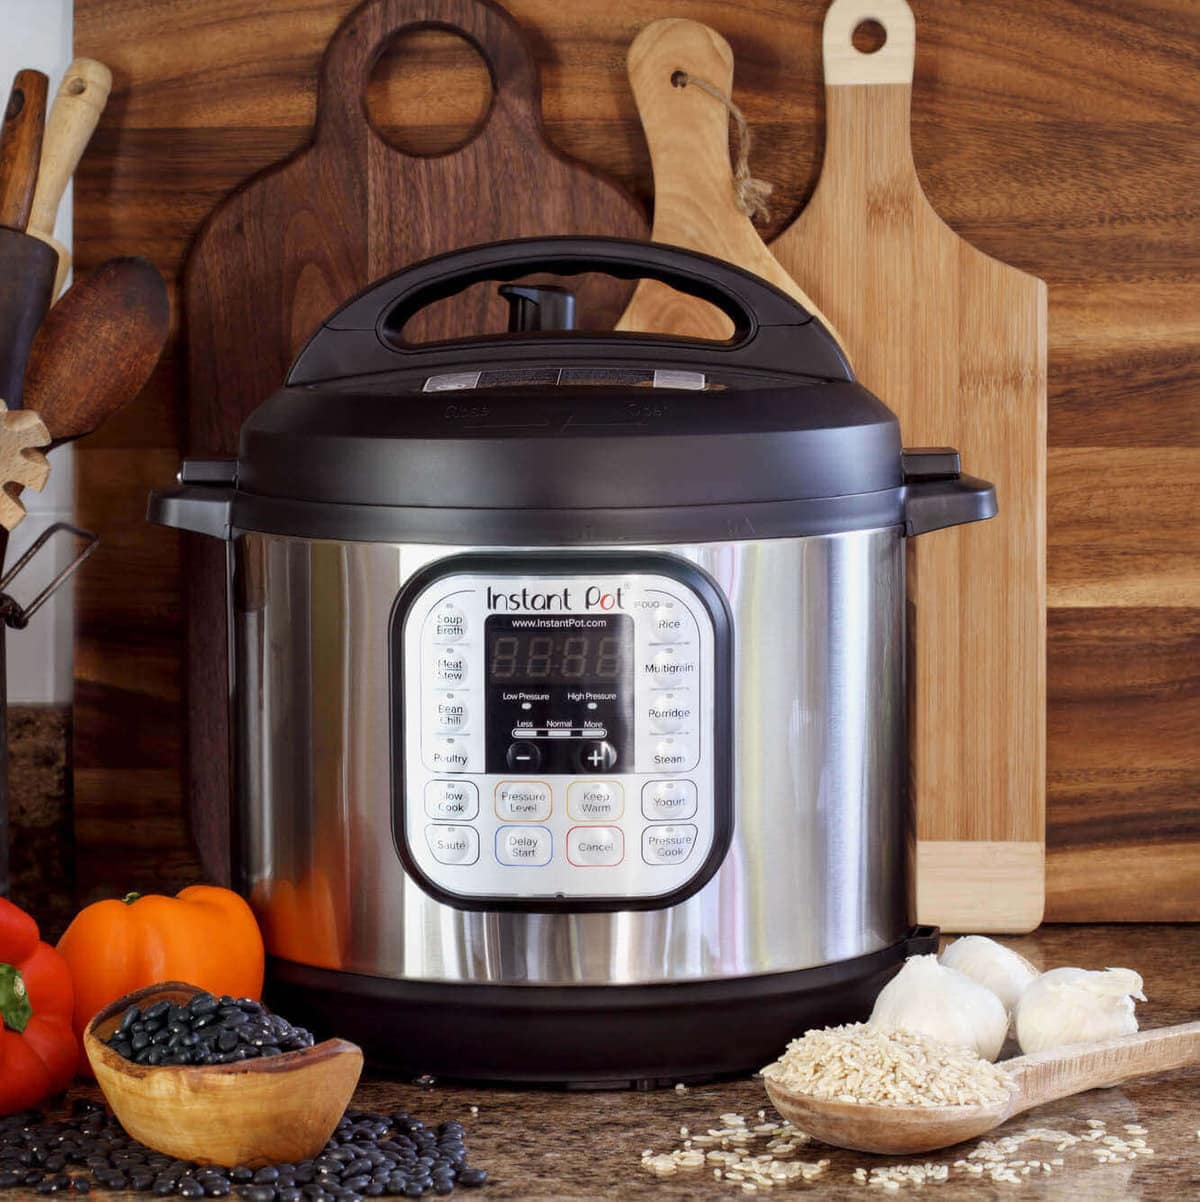 How to Use an Instant Pot (Pressure Cooker) - A Complete Guide!